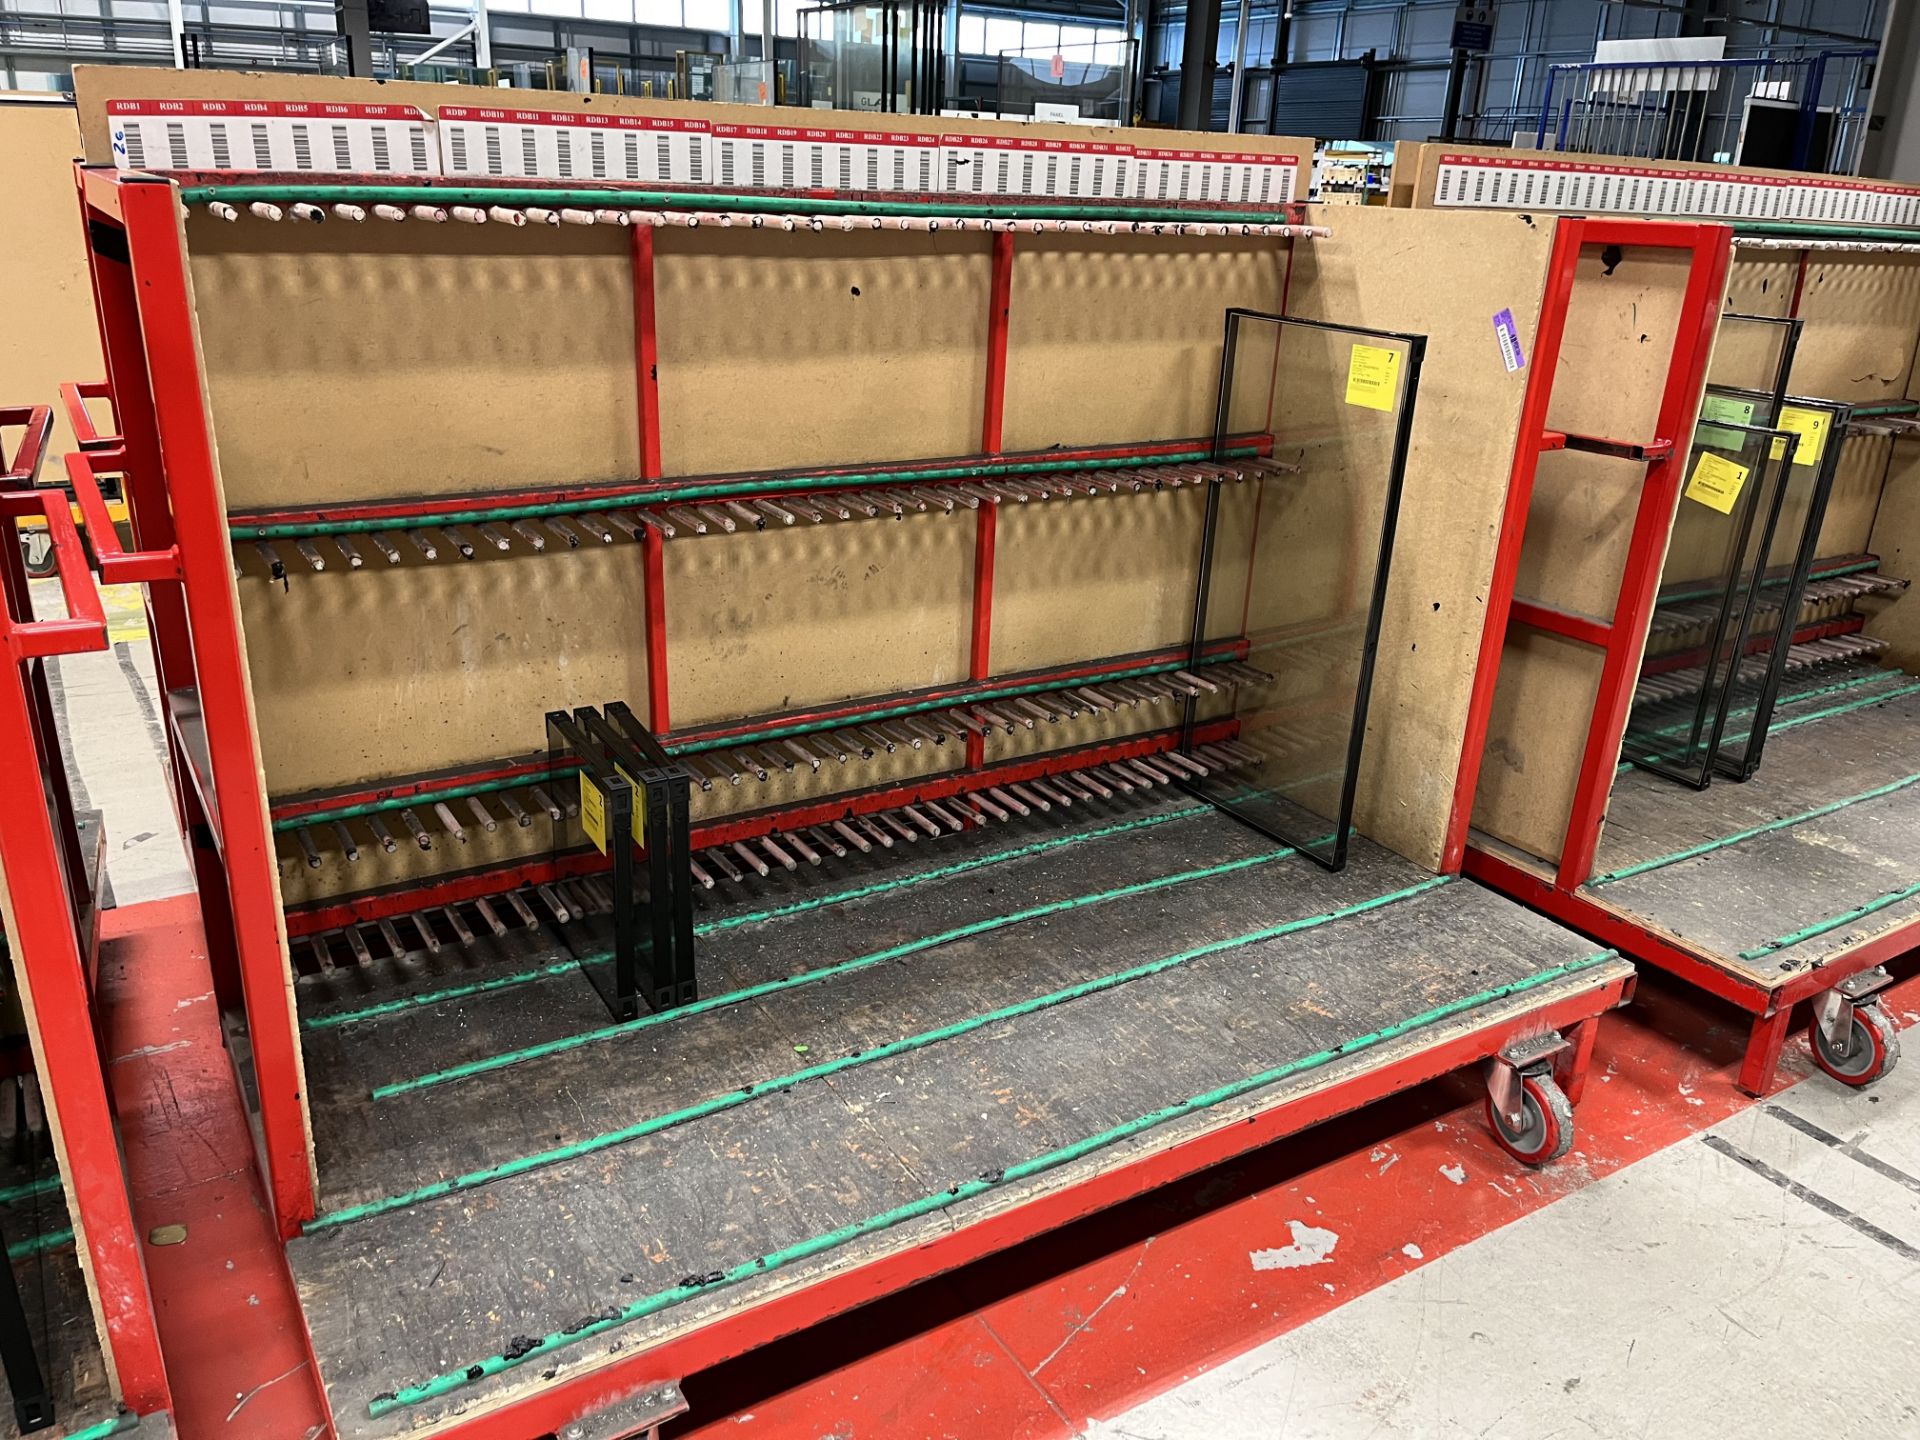 10, Steel fabricated Glazed unit storage trolleys, colour red, 40 locations, approx. size 1 x 2.1 x